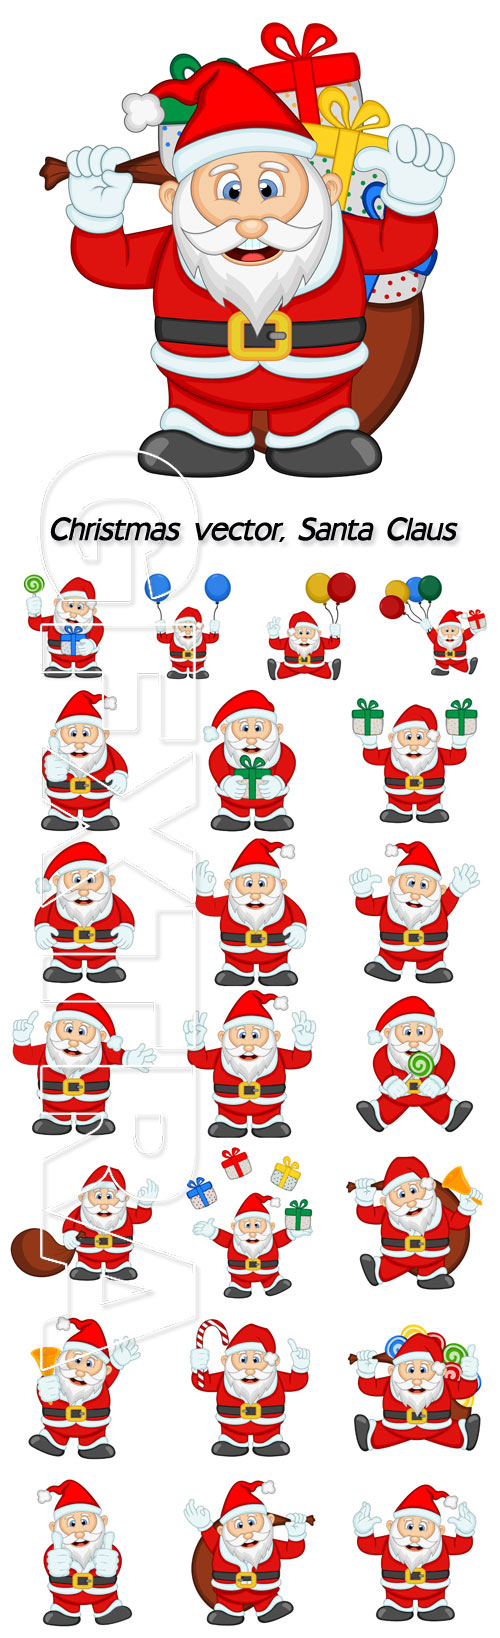 Santa Claus with gifts, vector Christmas